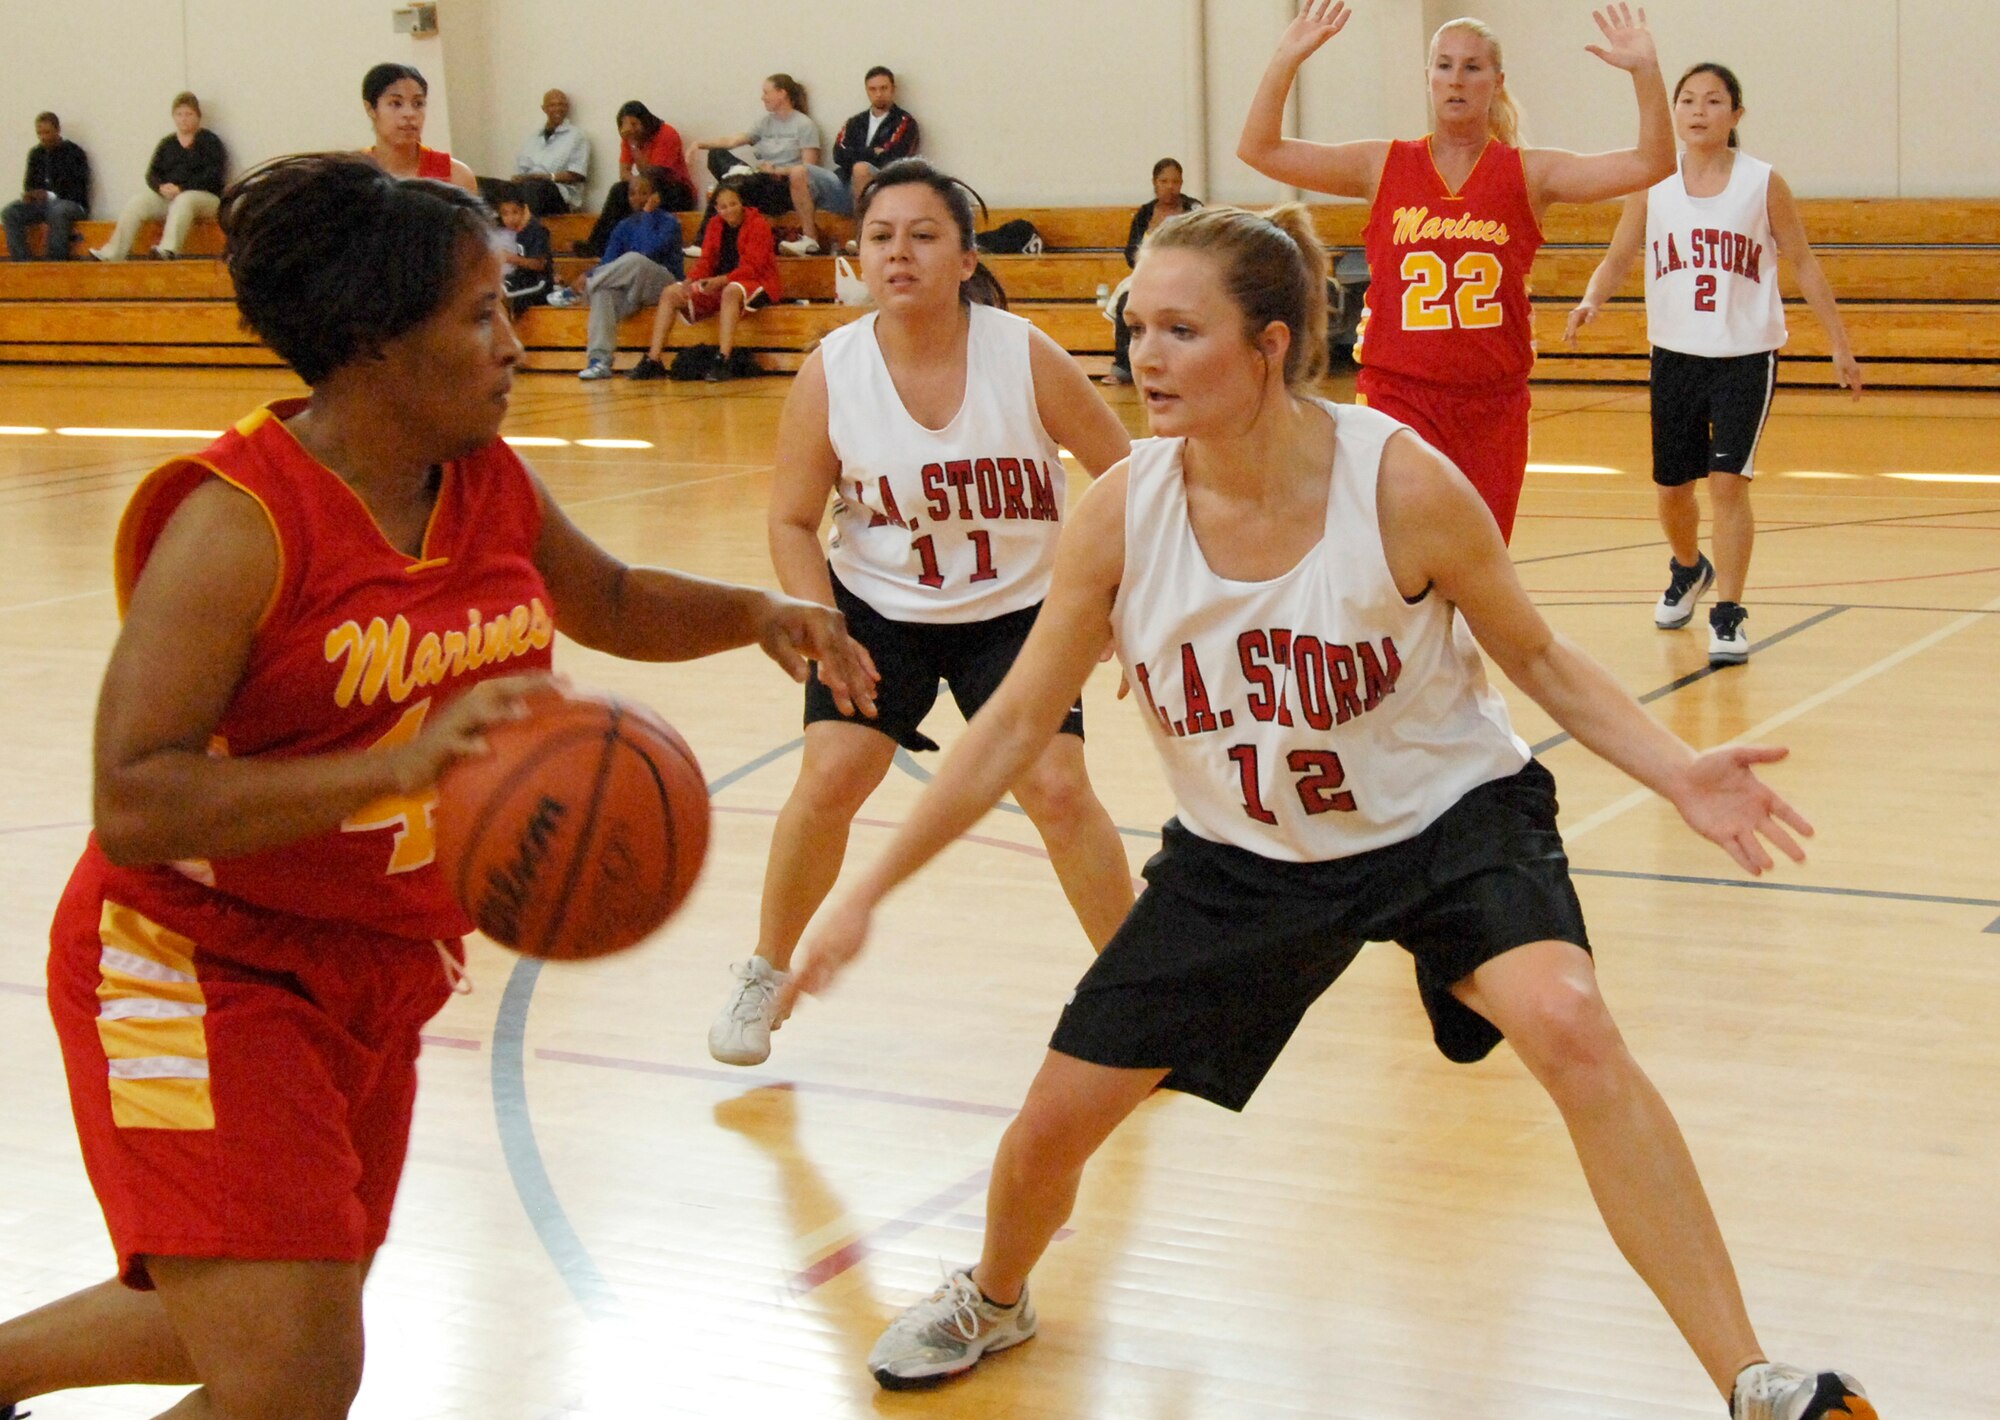 Ayesha DesParte, 61st CS, plays defense against a player from Twenty Nine Palms Marine Corps Base in military basketball league play.  Twenty Nine Palms edged out Los Angeles AFB’s Storm 54 to 50. (Photo by Lou Hernandez)